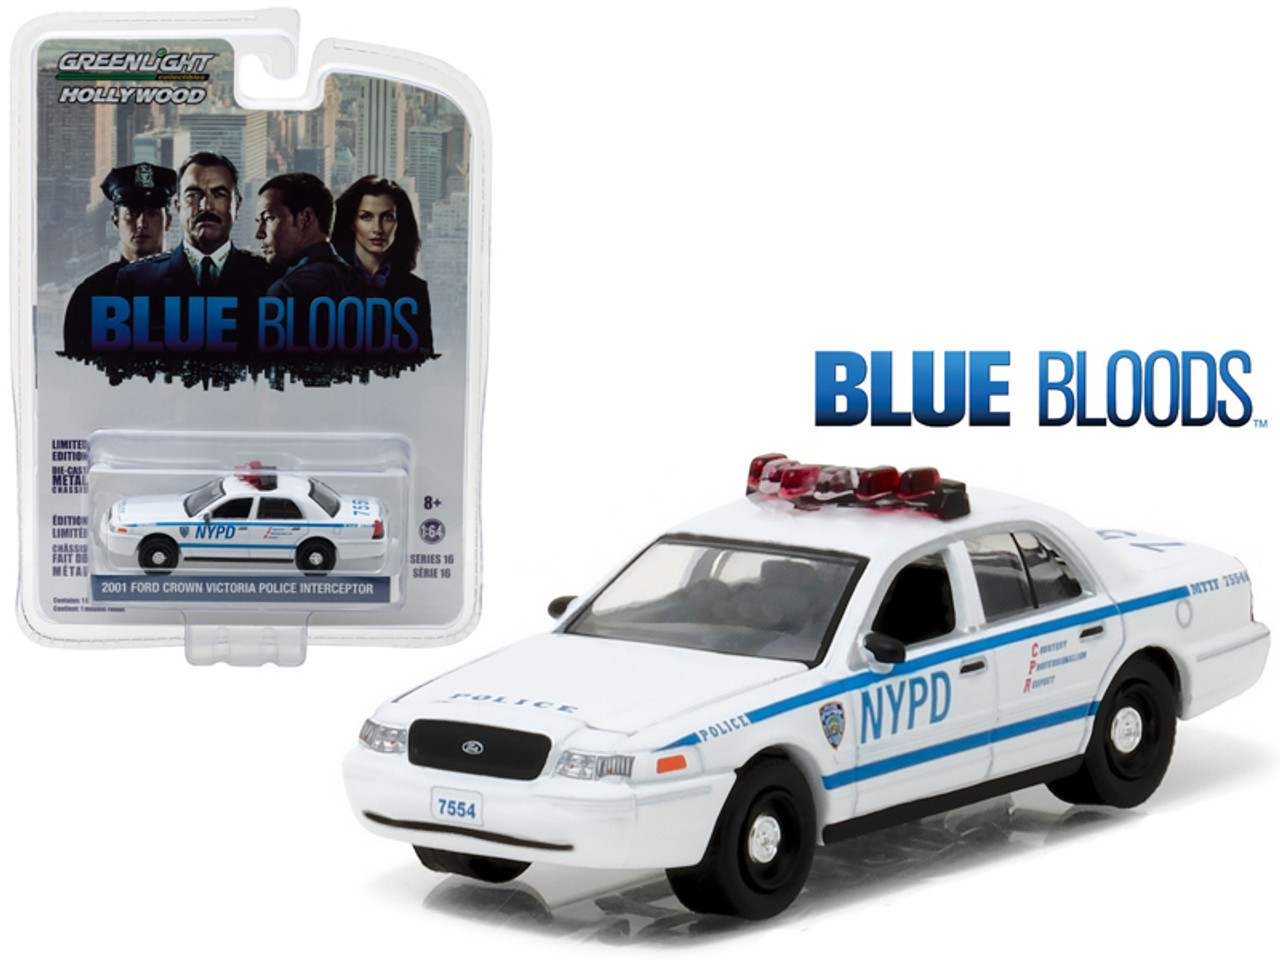 2001 Ford Crown Victoria Police Interceptor New York City Department (NYPD) "Blue Bloods" TV Series (2010-Current) 1/64 Diecast Model Car by Greenlight